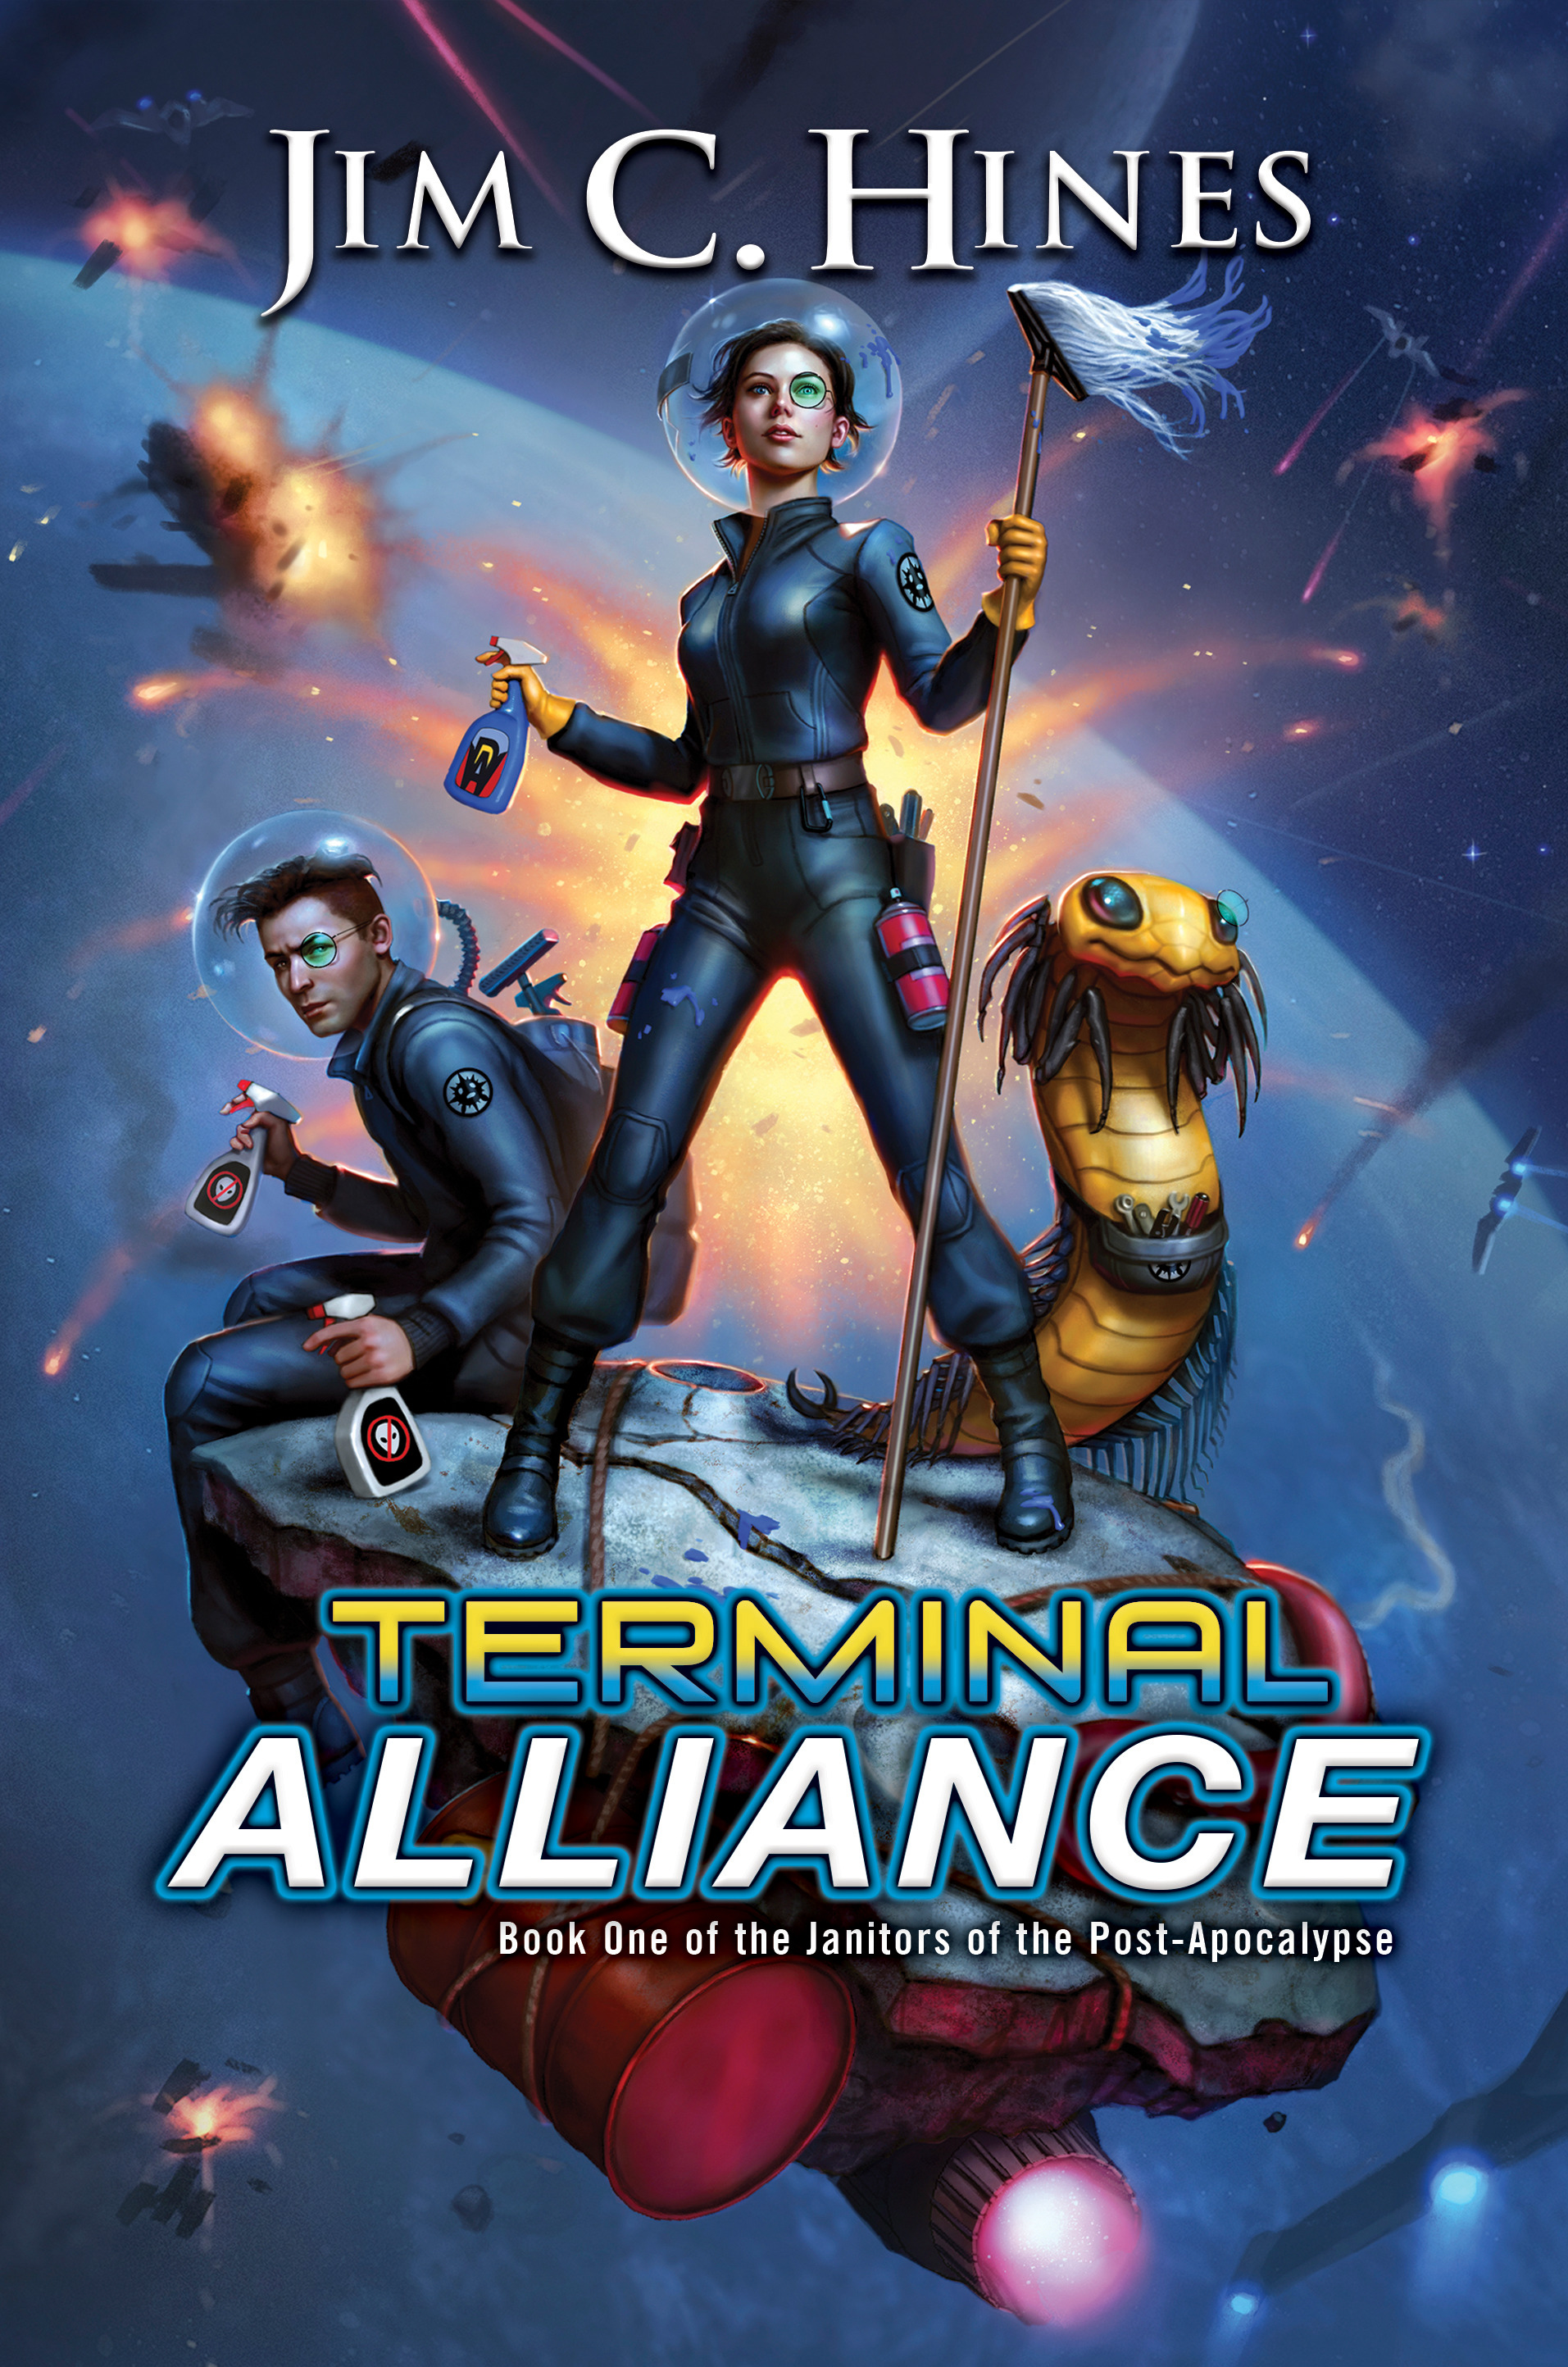 Janitors of the Post-Apocalypse T.01 - Terminal Alliance | Hines, Jim C.